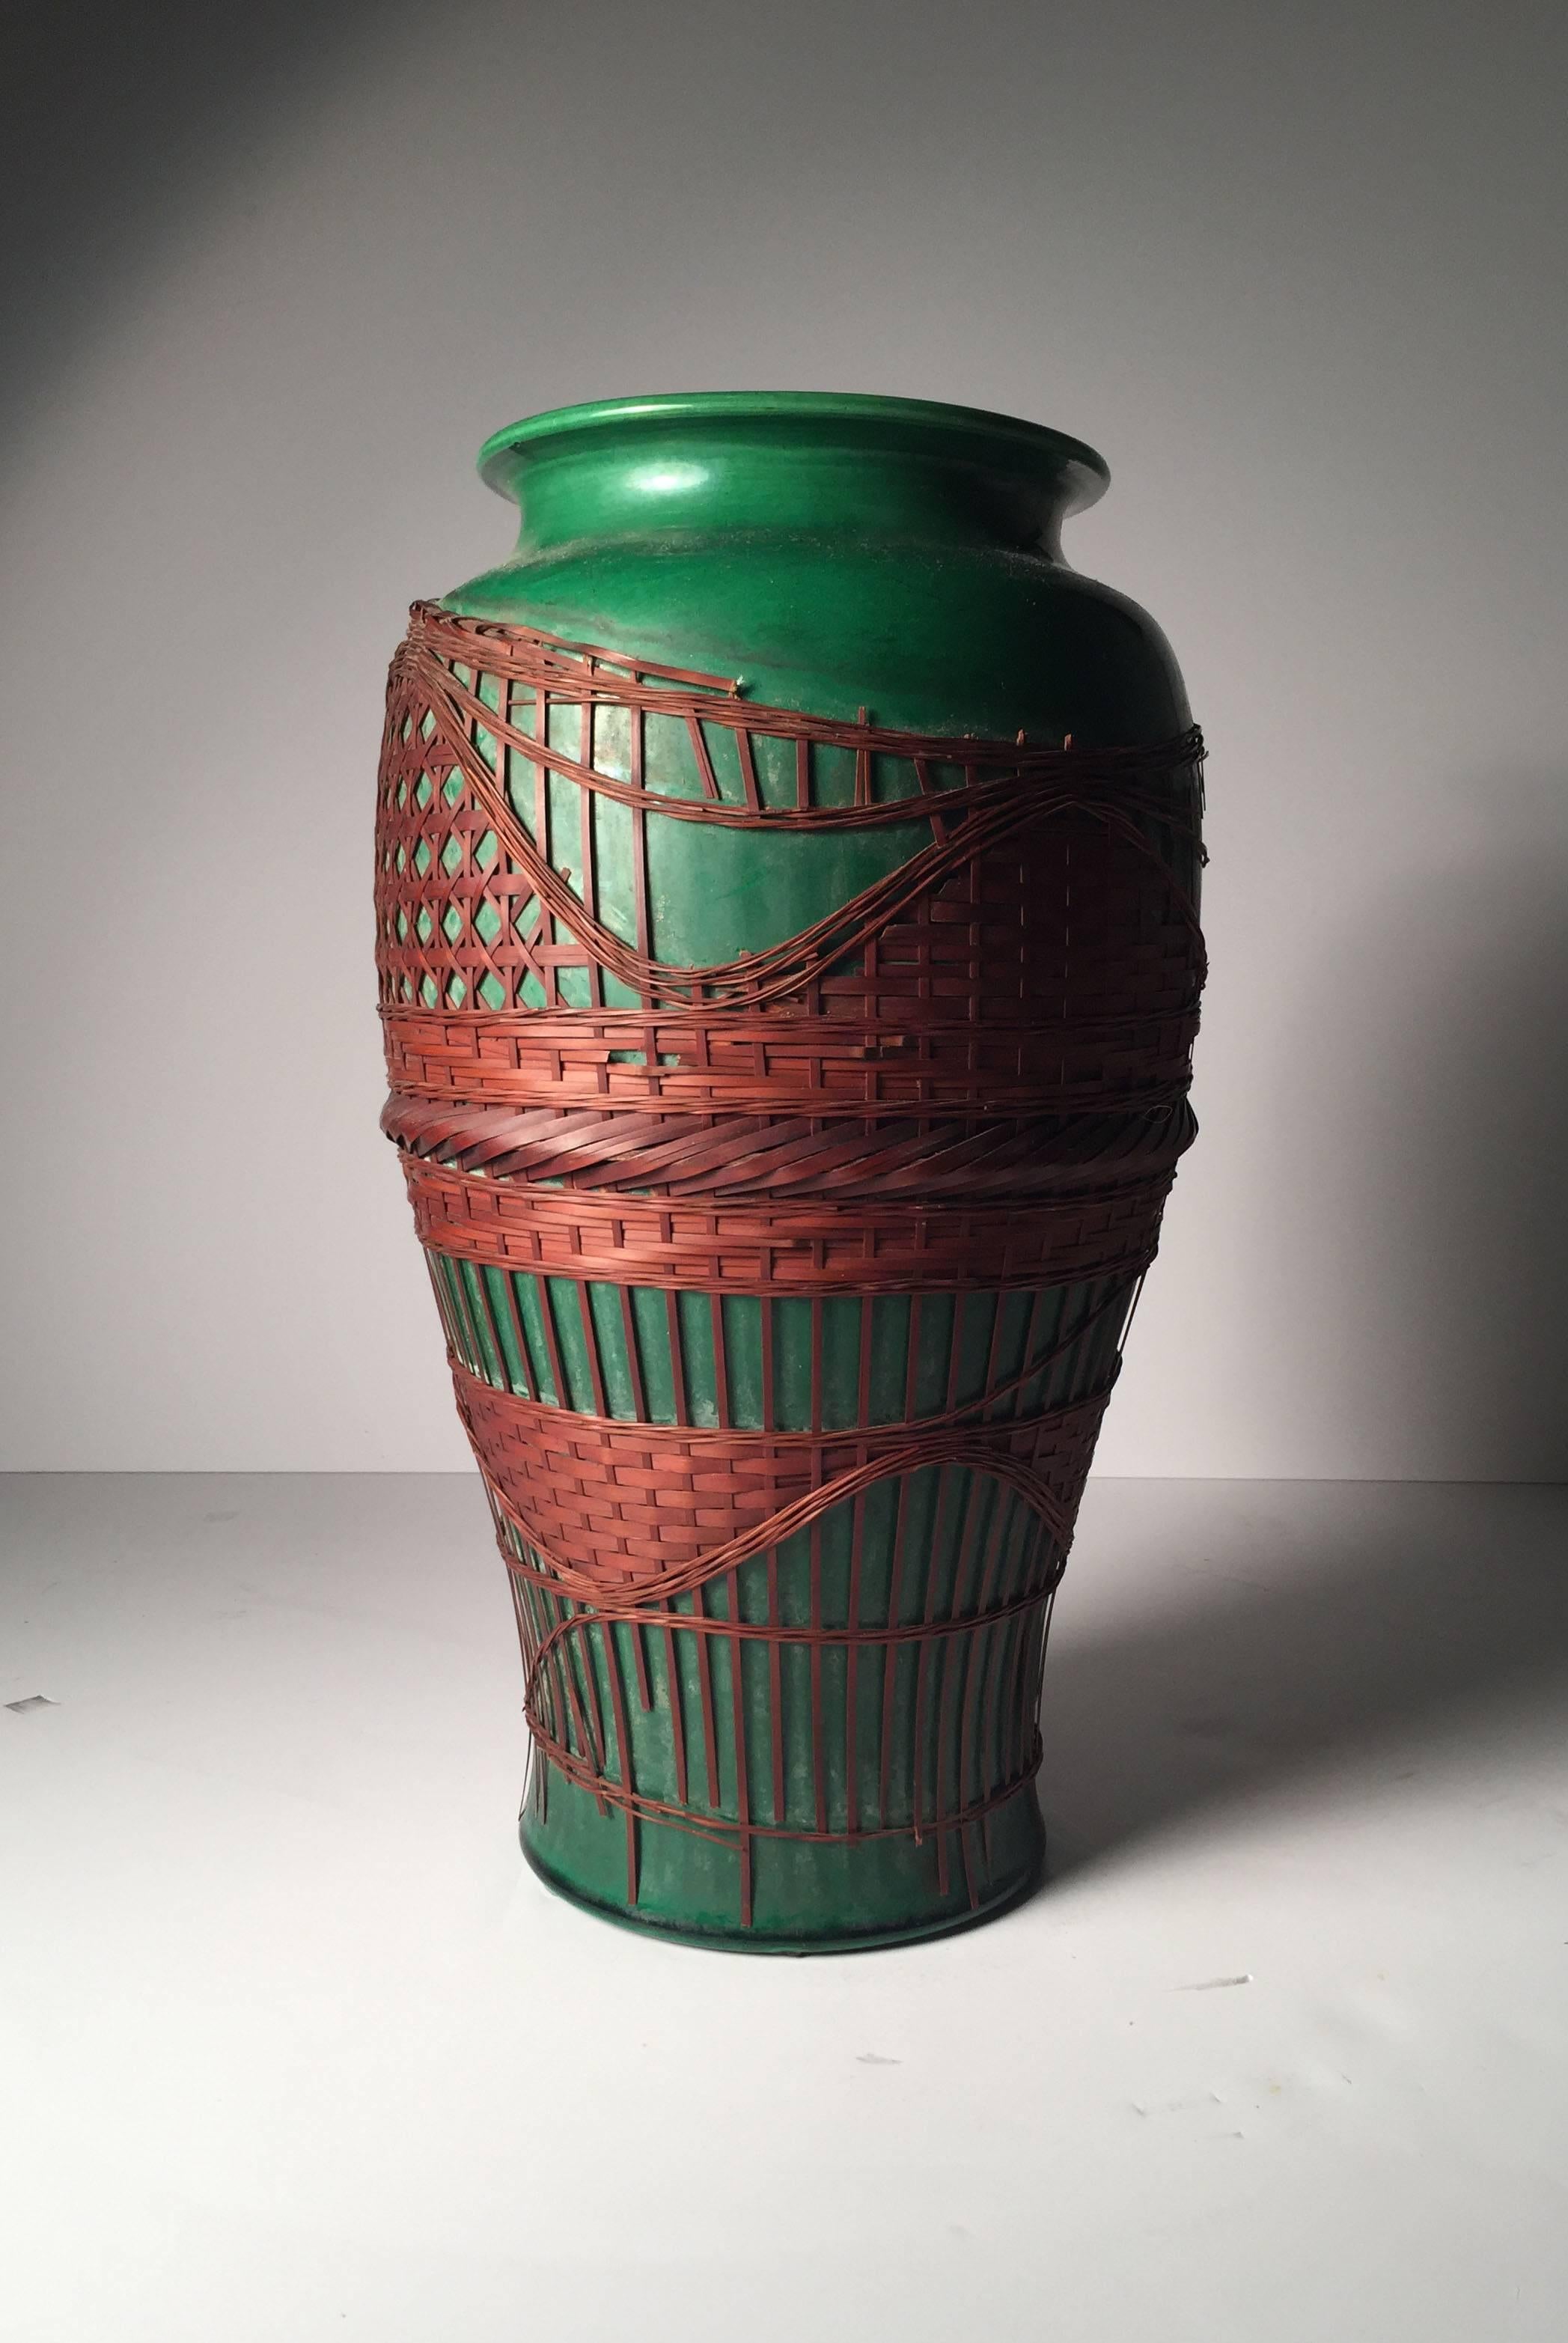 Nice size Awaji Japanese pottery form vase in green glaze. The weaving as shown is damaged in areas but as shown very beautiful. One could remove the weaving if so desired.